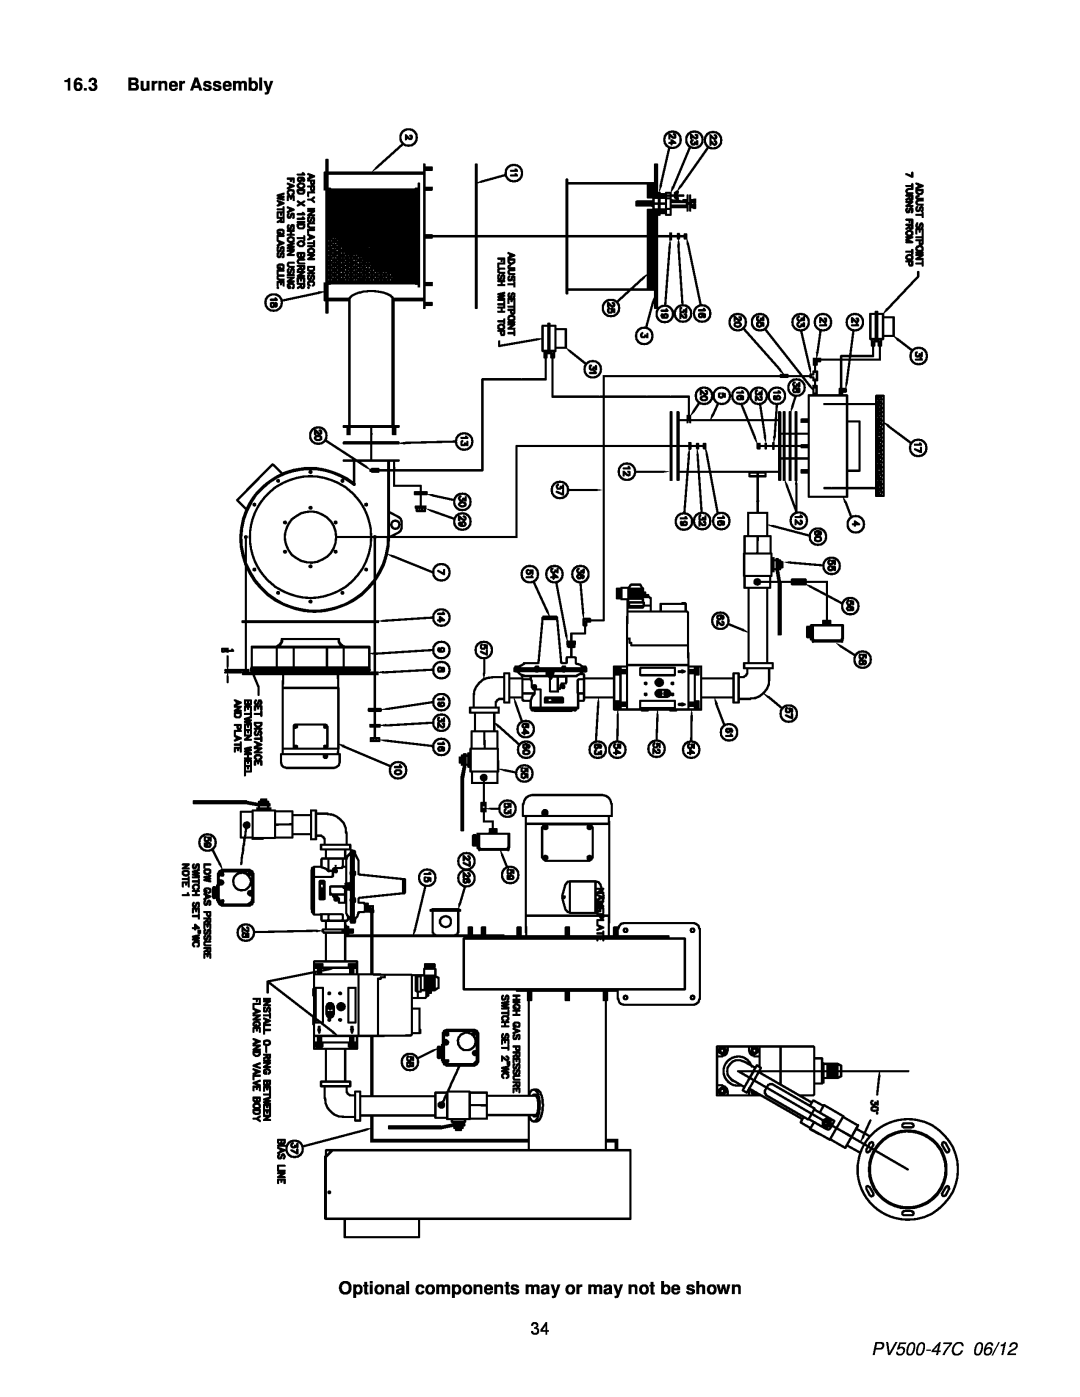 PVI Industries manual 16.3Burner Assembly, Optional components may or may not be shown, PV500-47C06/12 